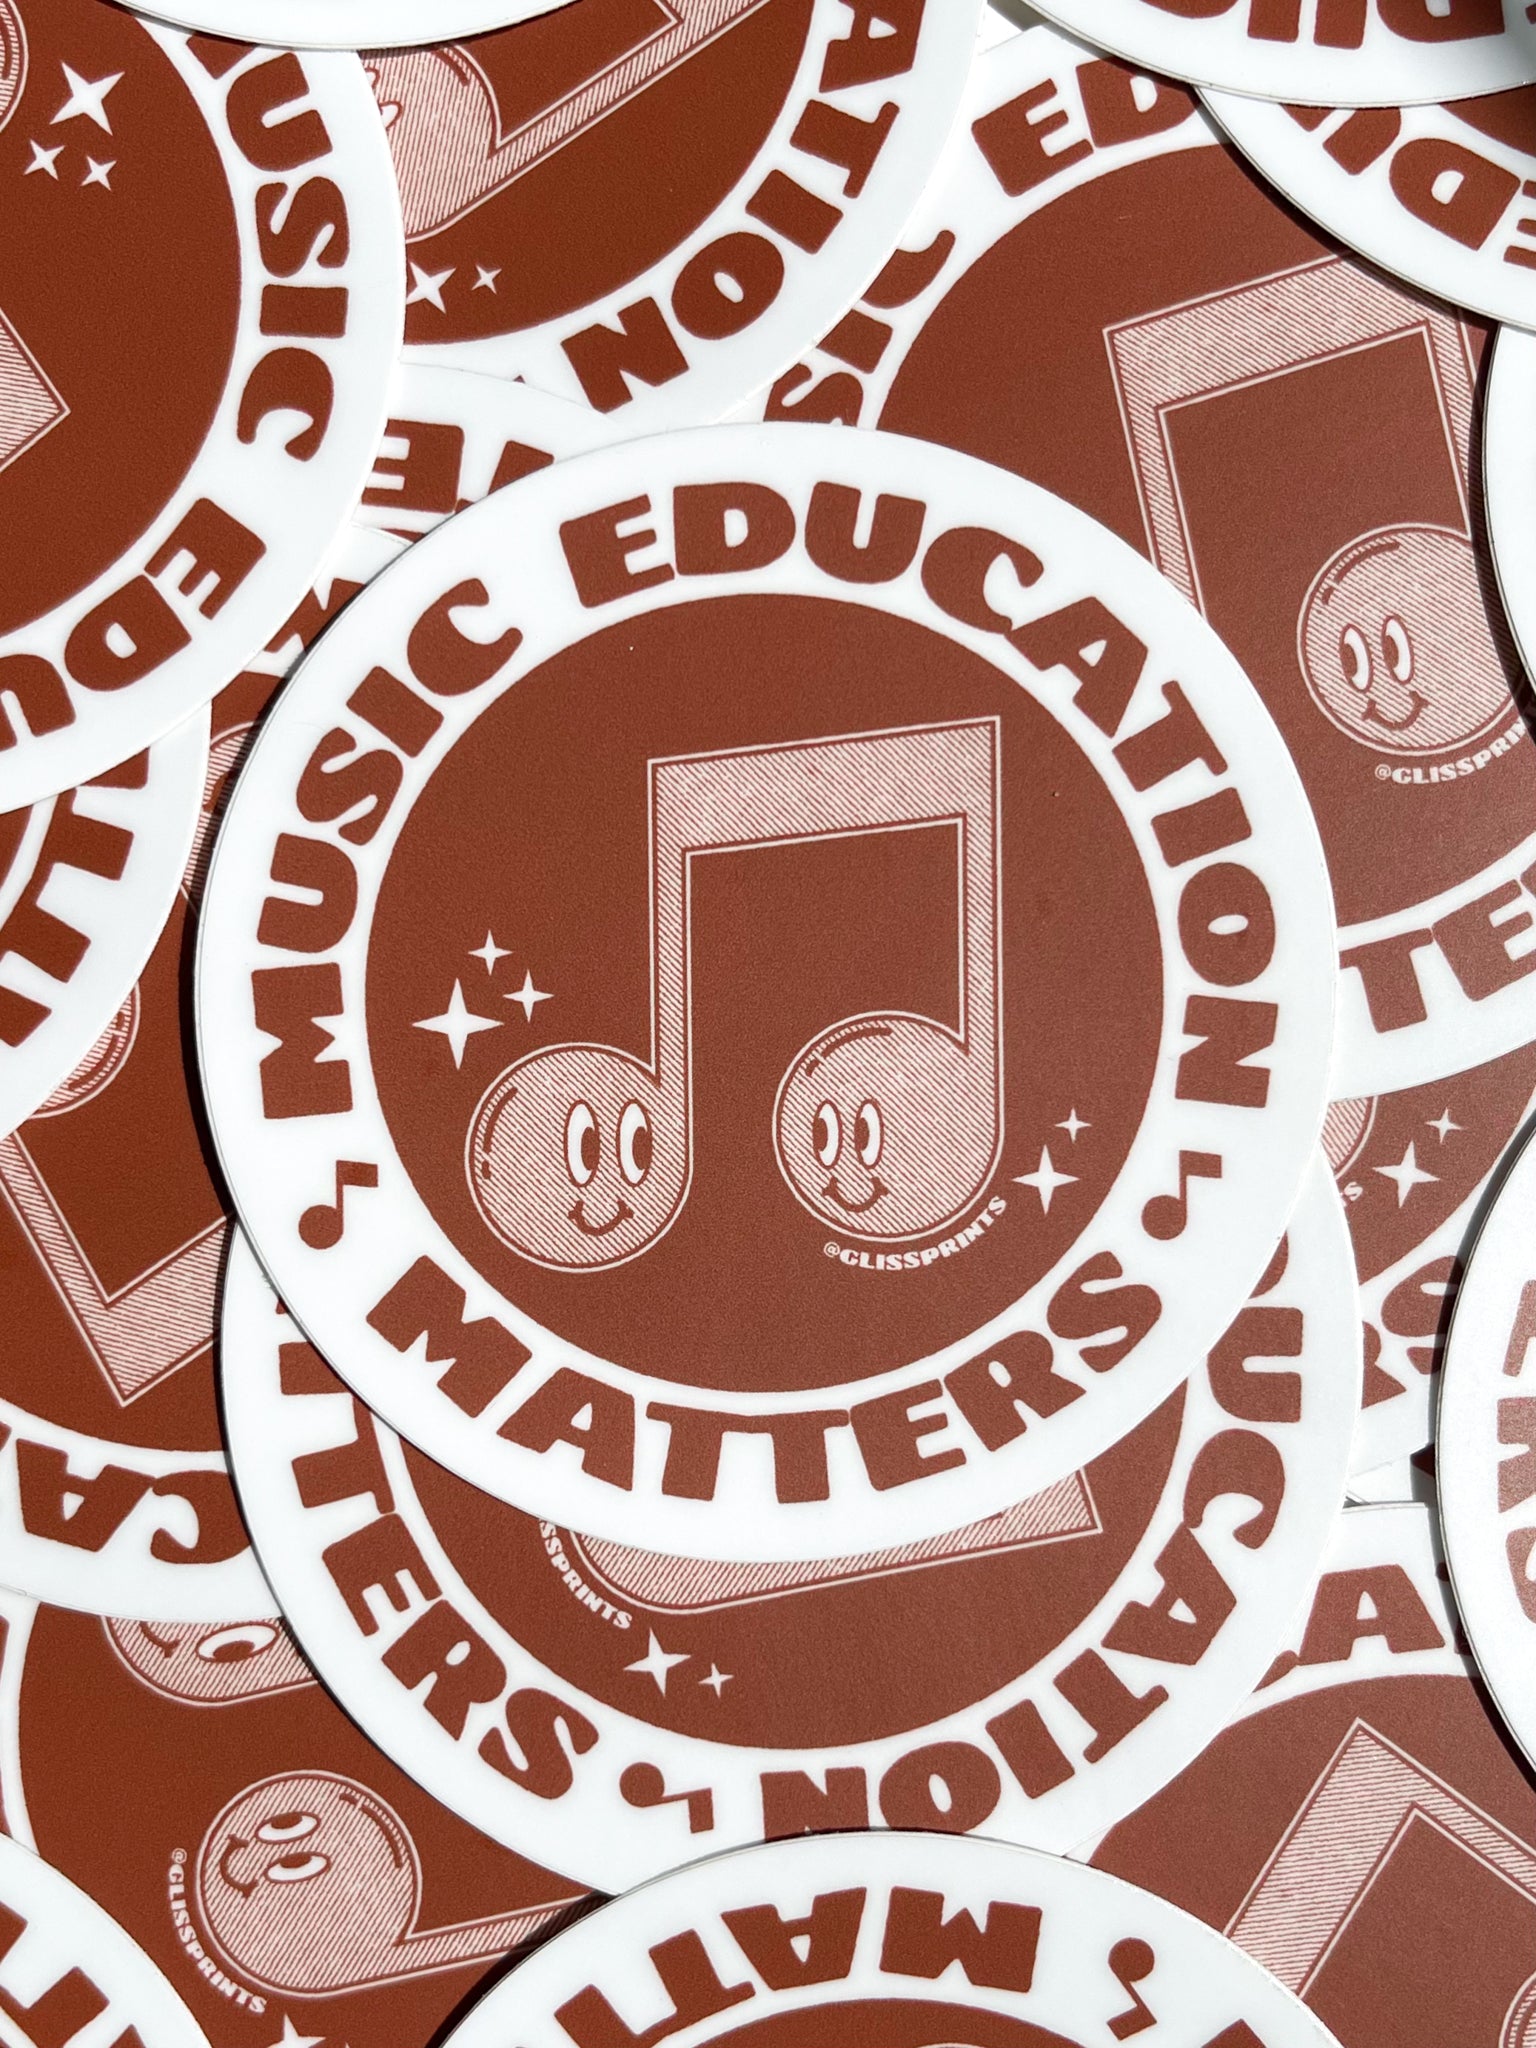 Music Education Matters Sticker, Red